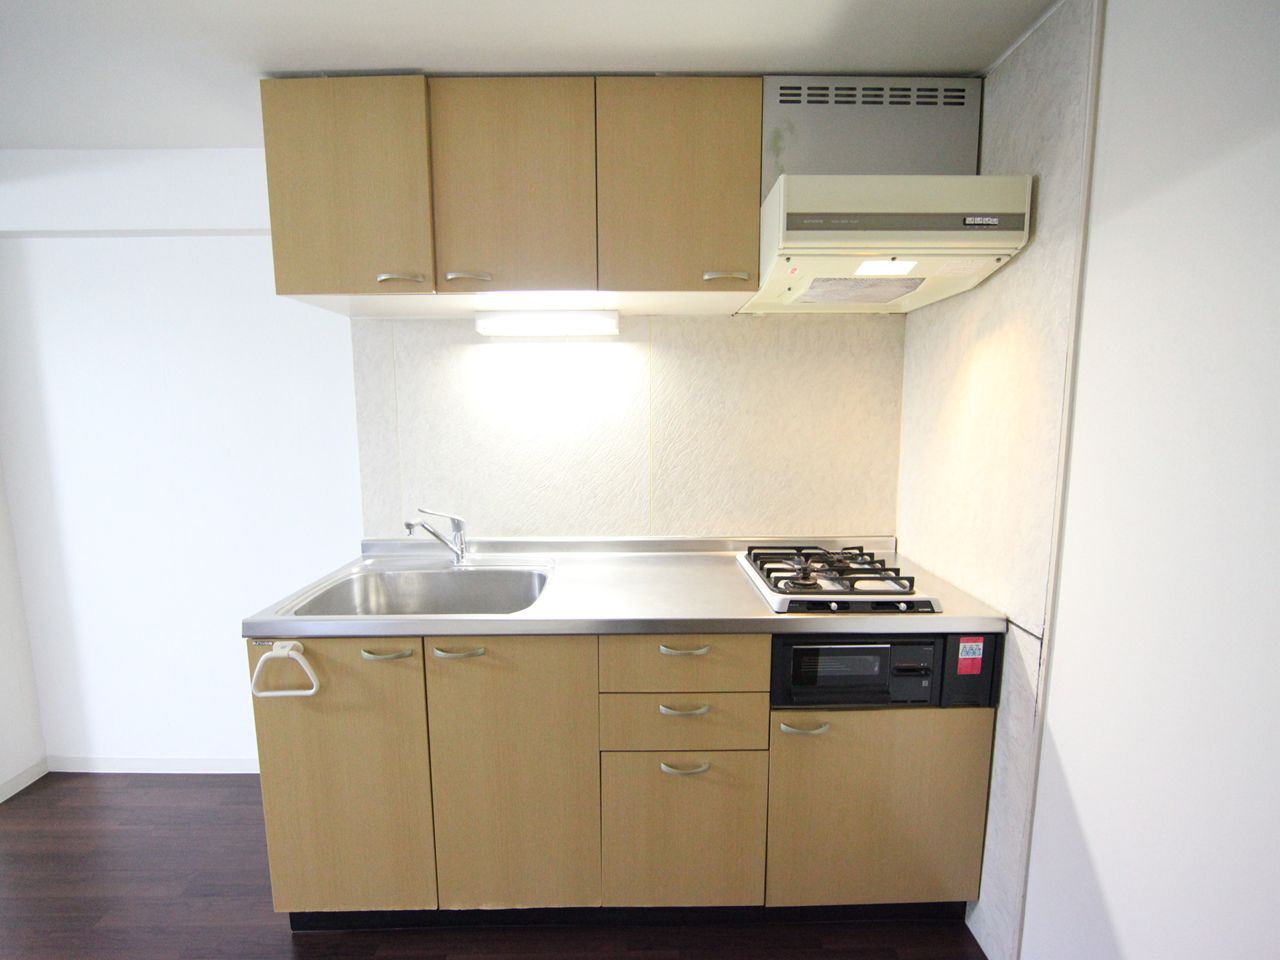 Kitchen. System kitchen (gas two-burner stove grill)